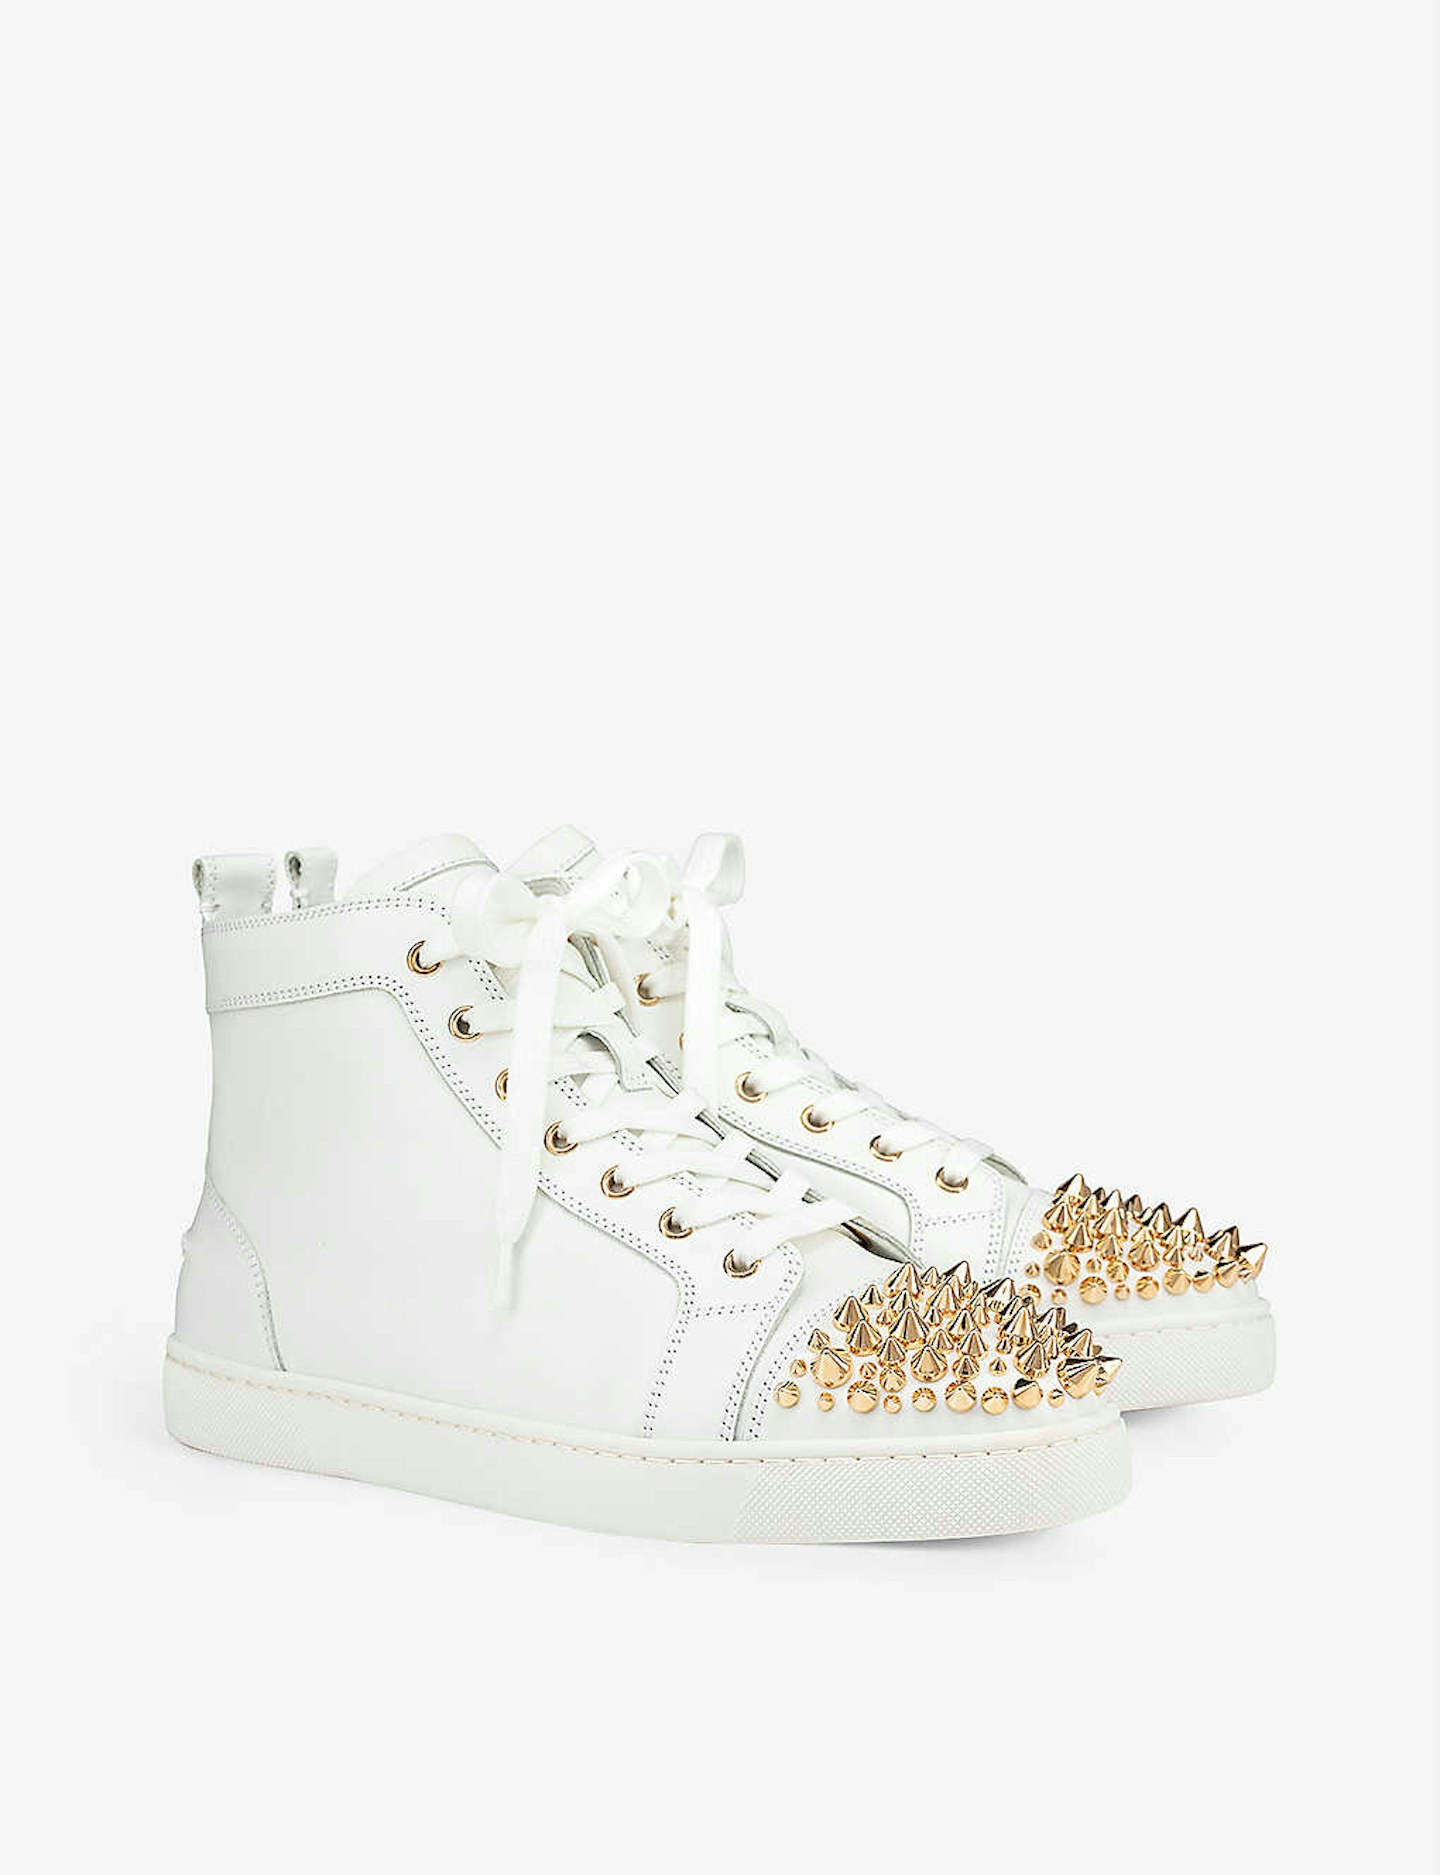 Christian Louboutin, High-Top Trainers